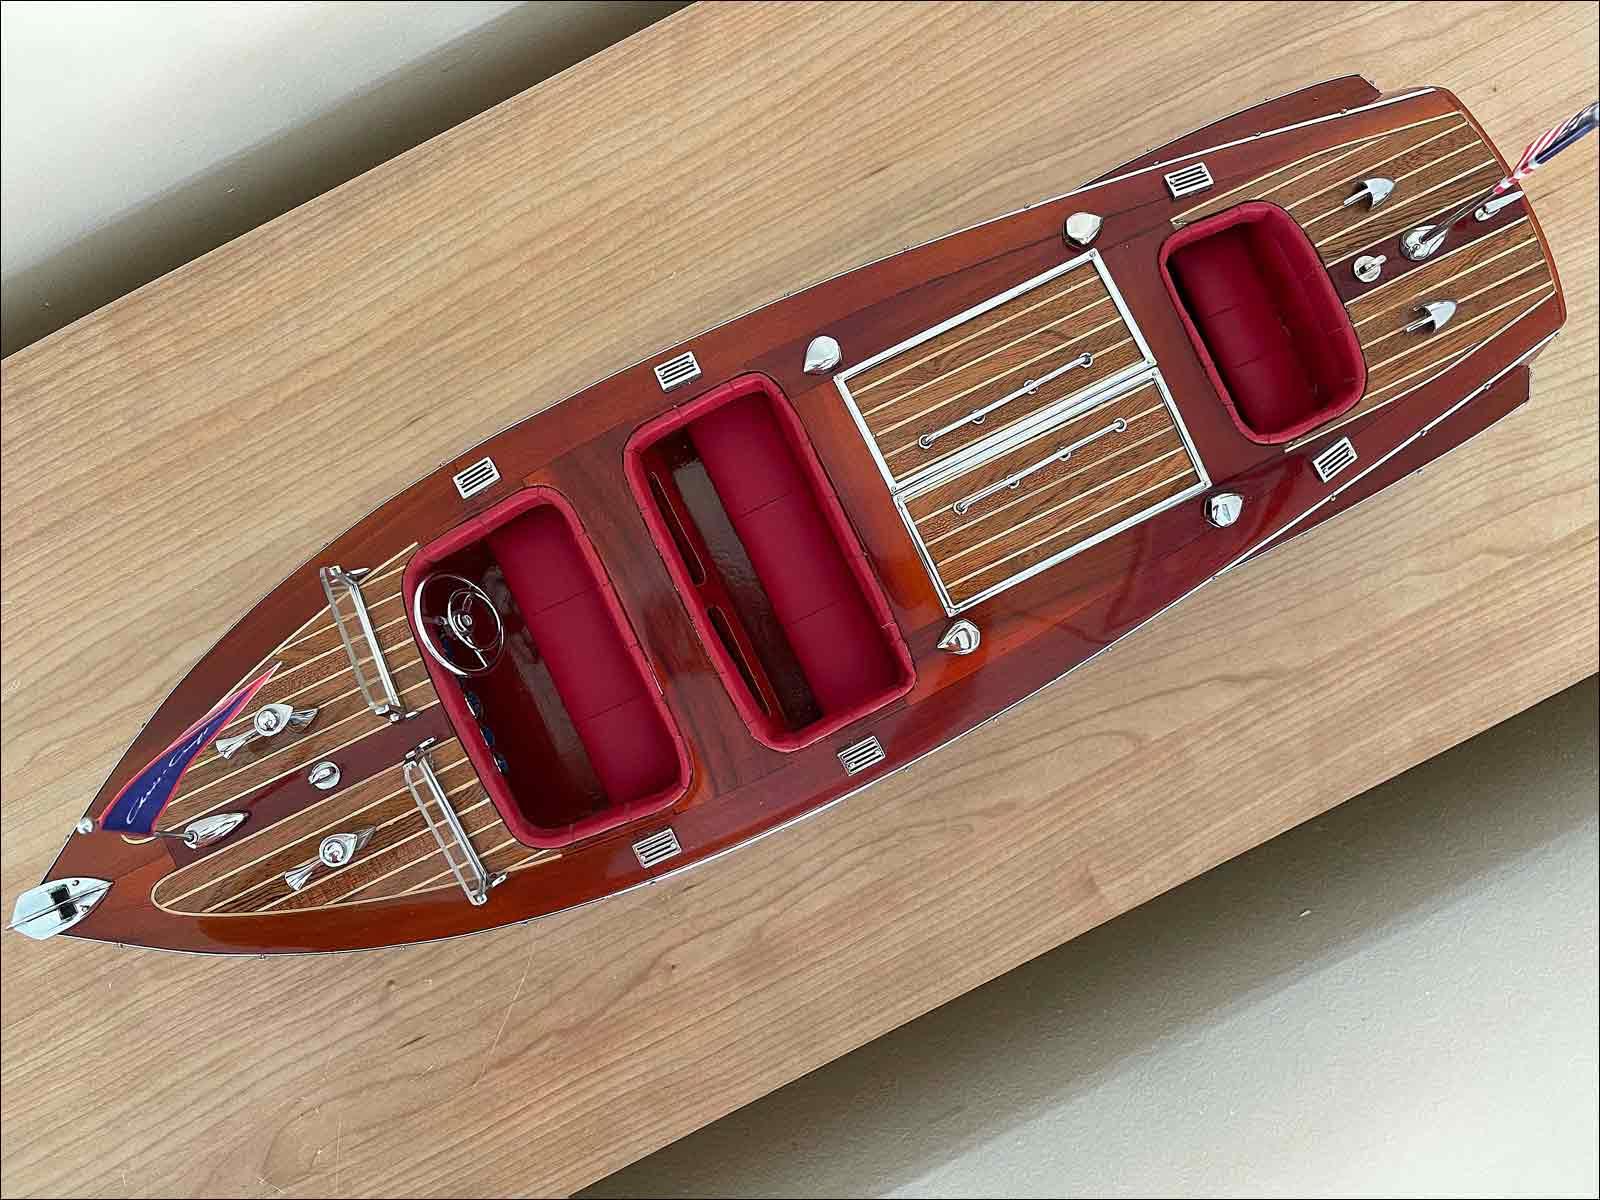 Chris Craft small scale model boat